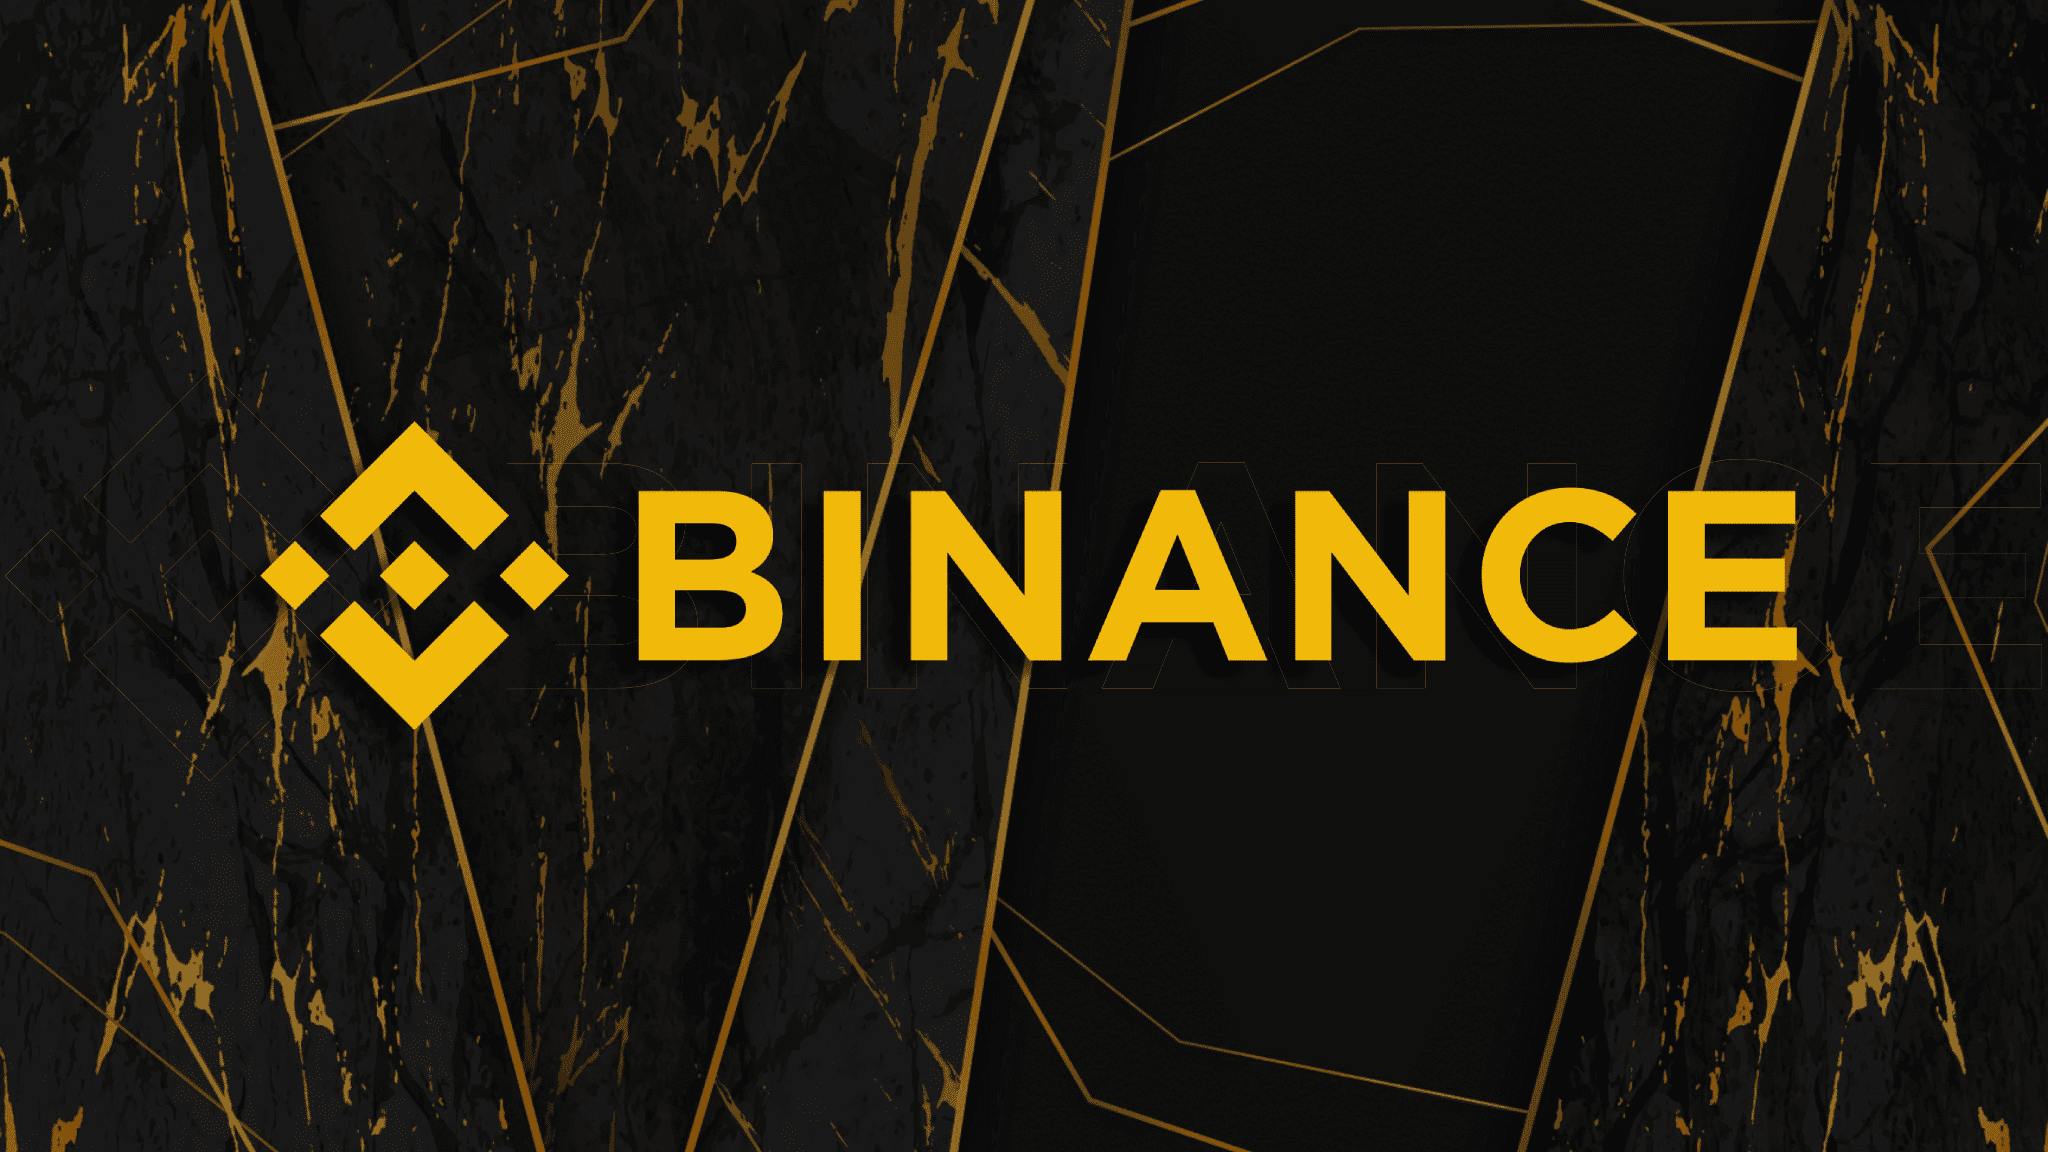 binance best crypto exchange for bitcoin and crypto